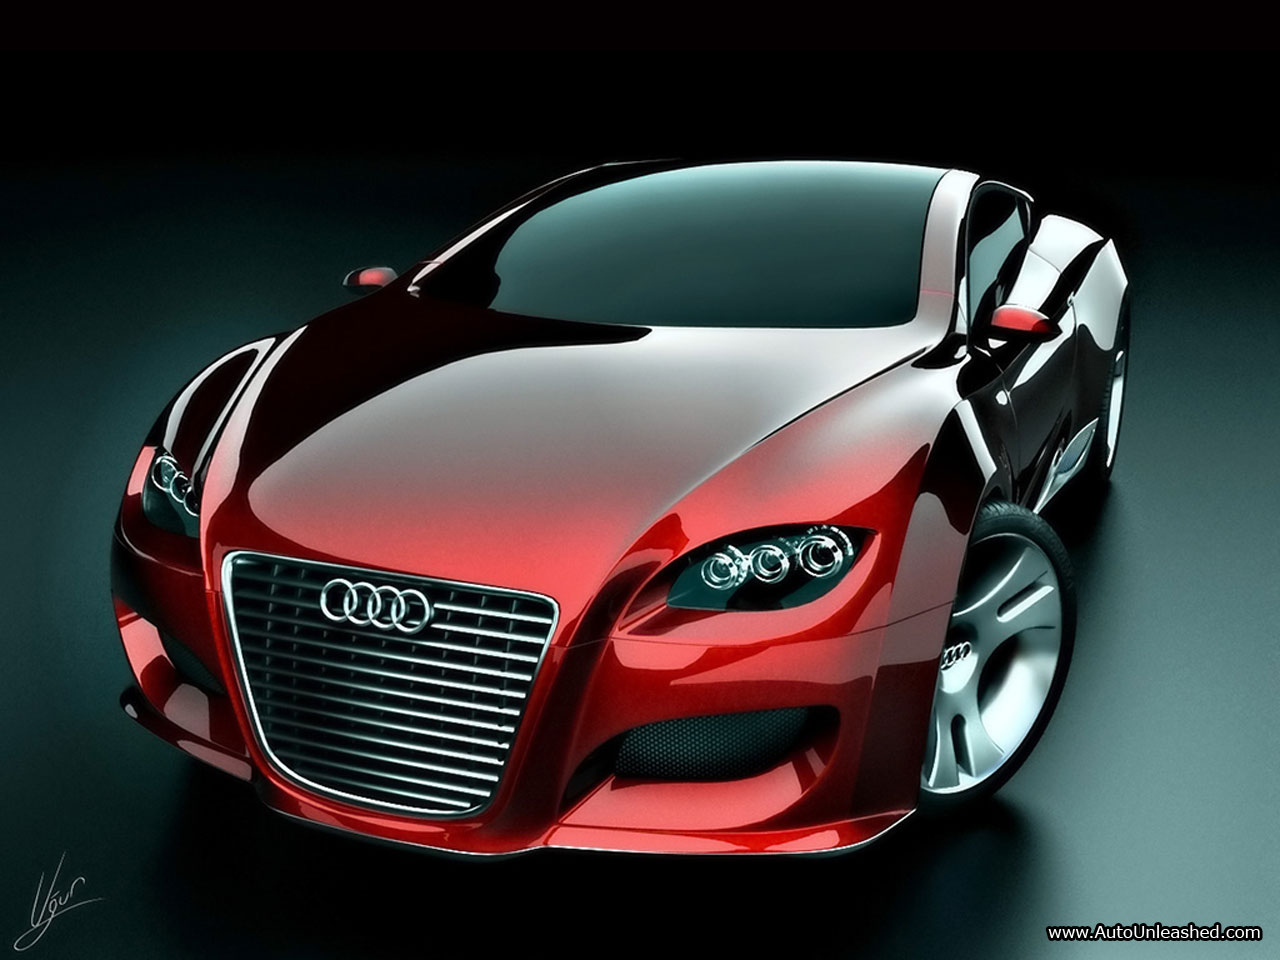 Sport Cars  Concept Cars  Cars Gallery: Concept car wallpaper